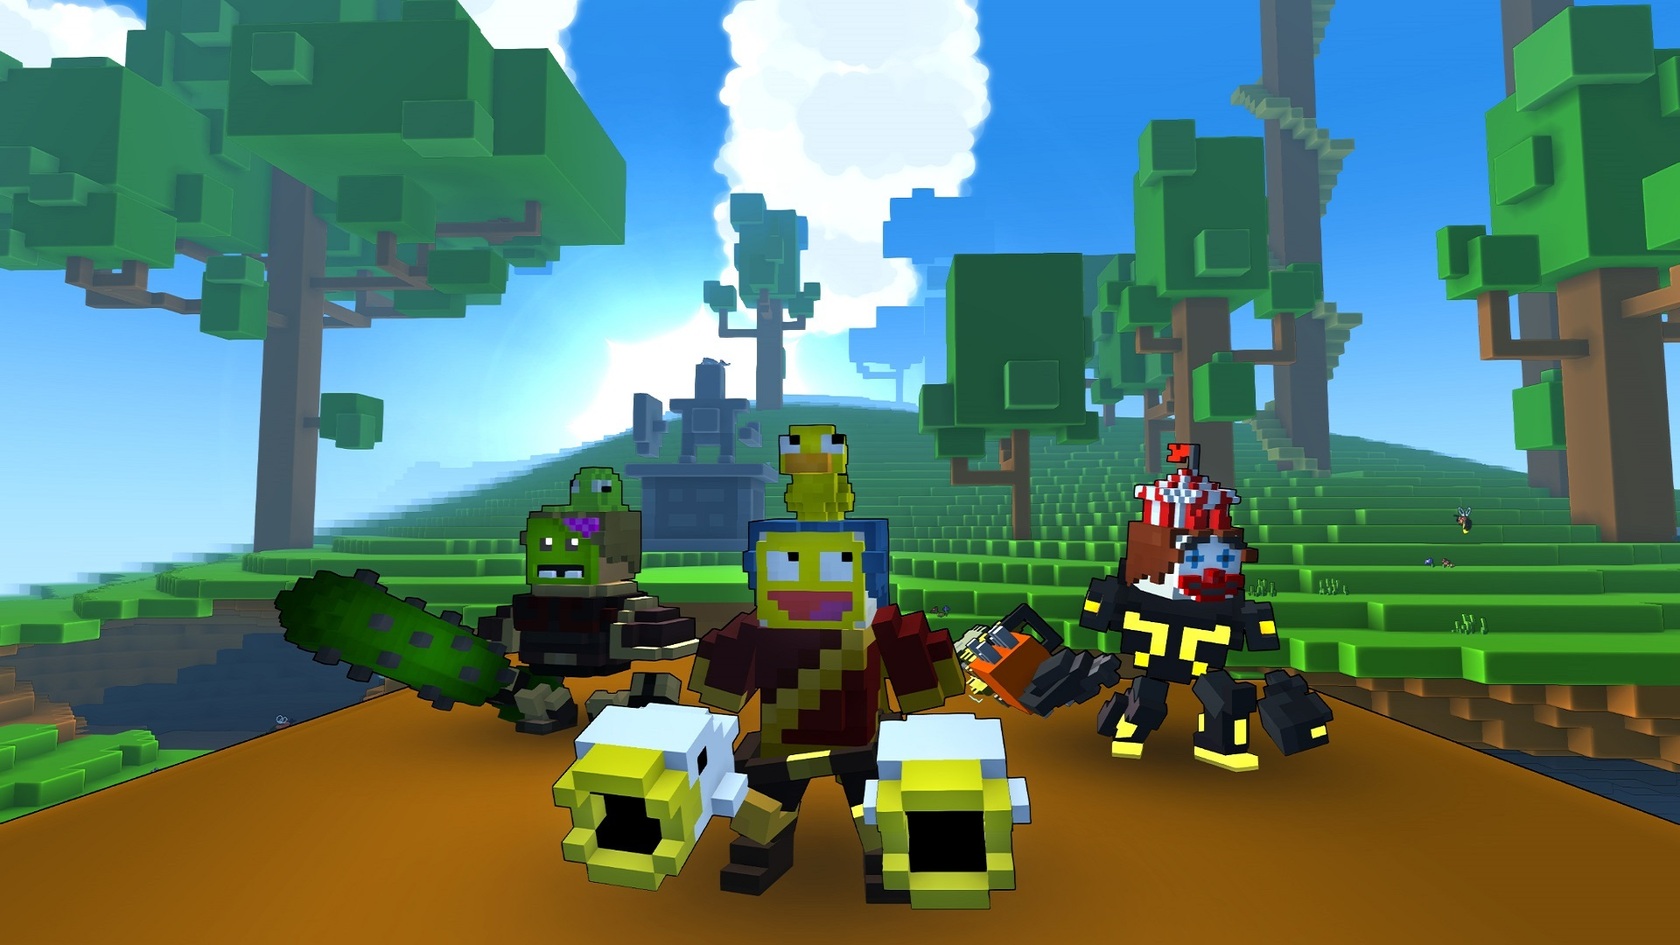 Trove a voxel mmo